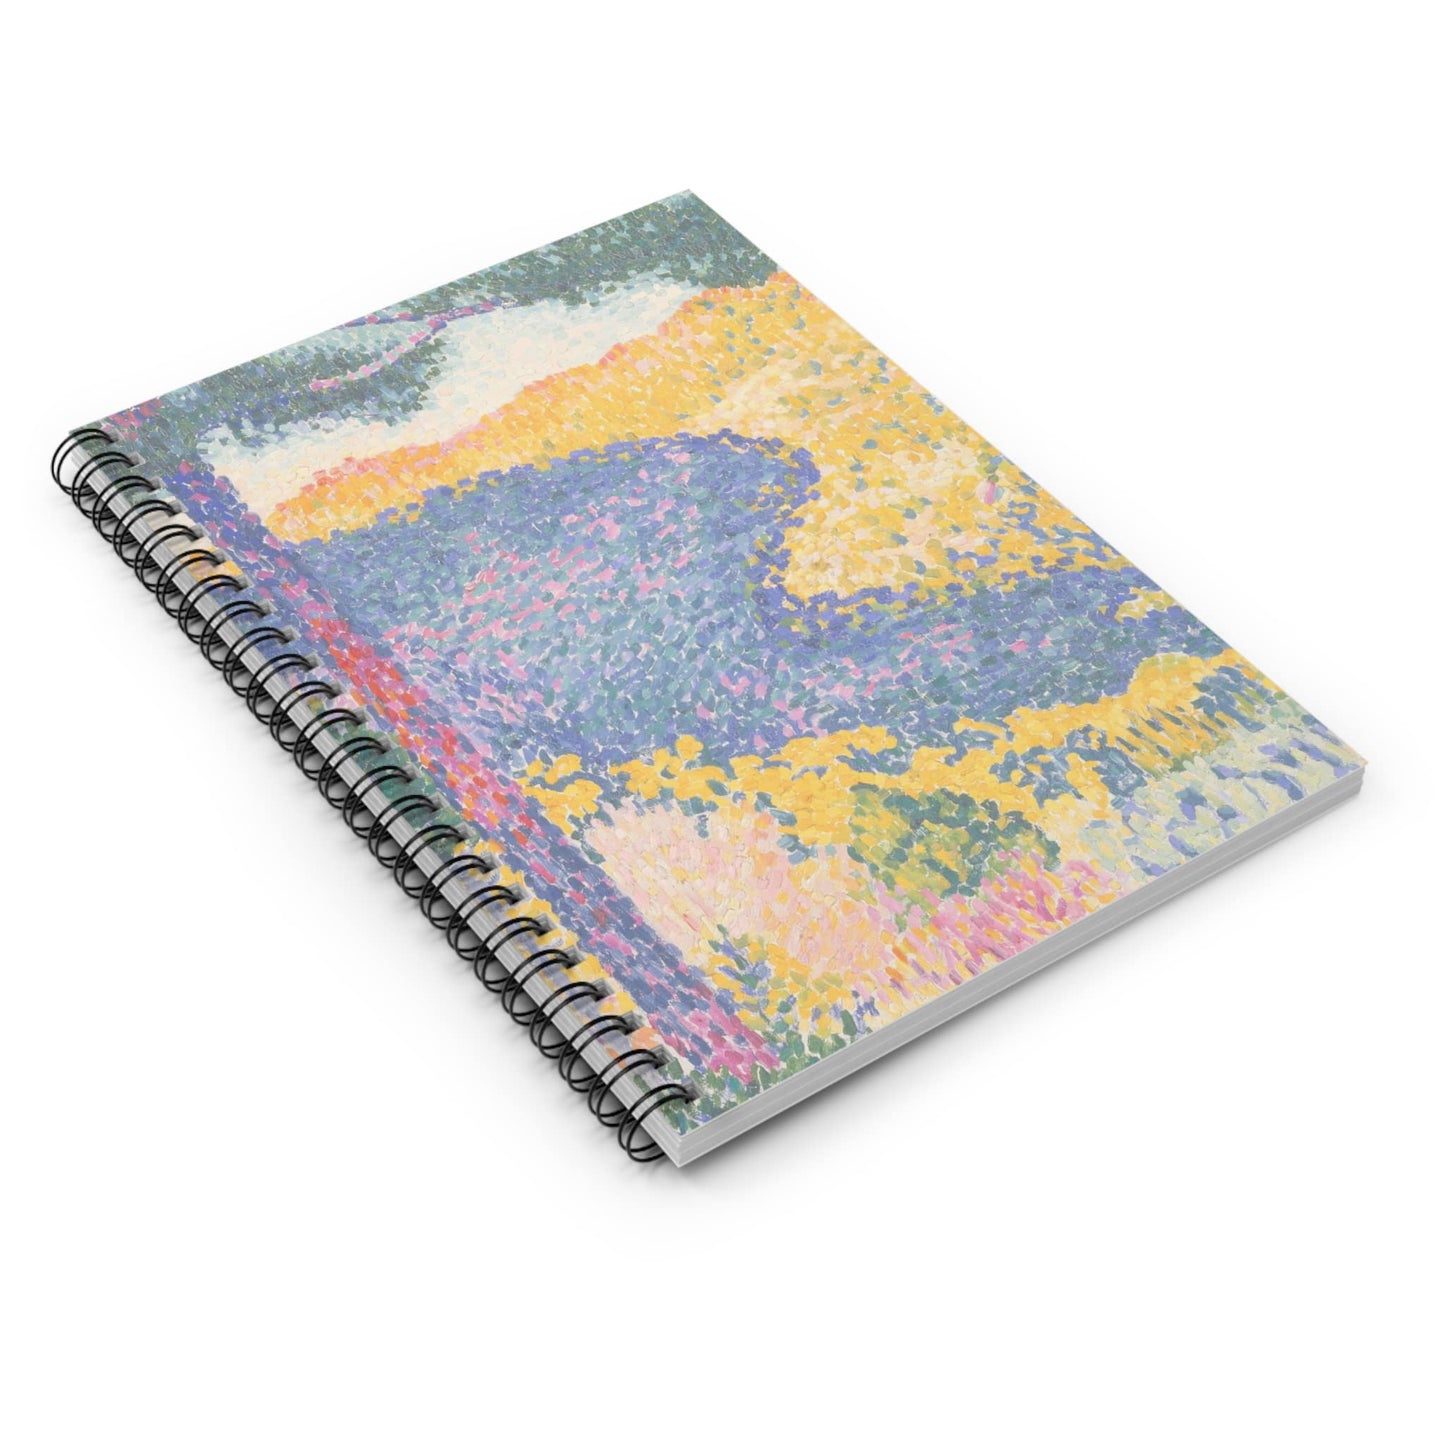 Colorful Landscape Spiral Notebook Laying Flat on White Surface